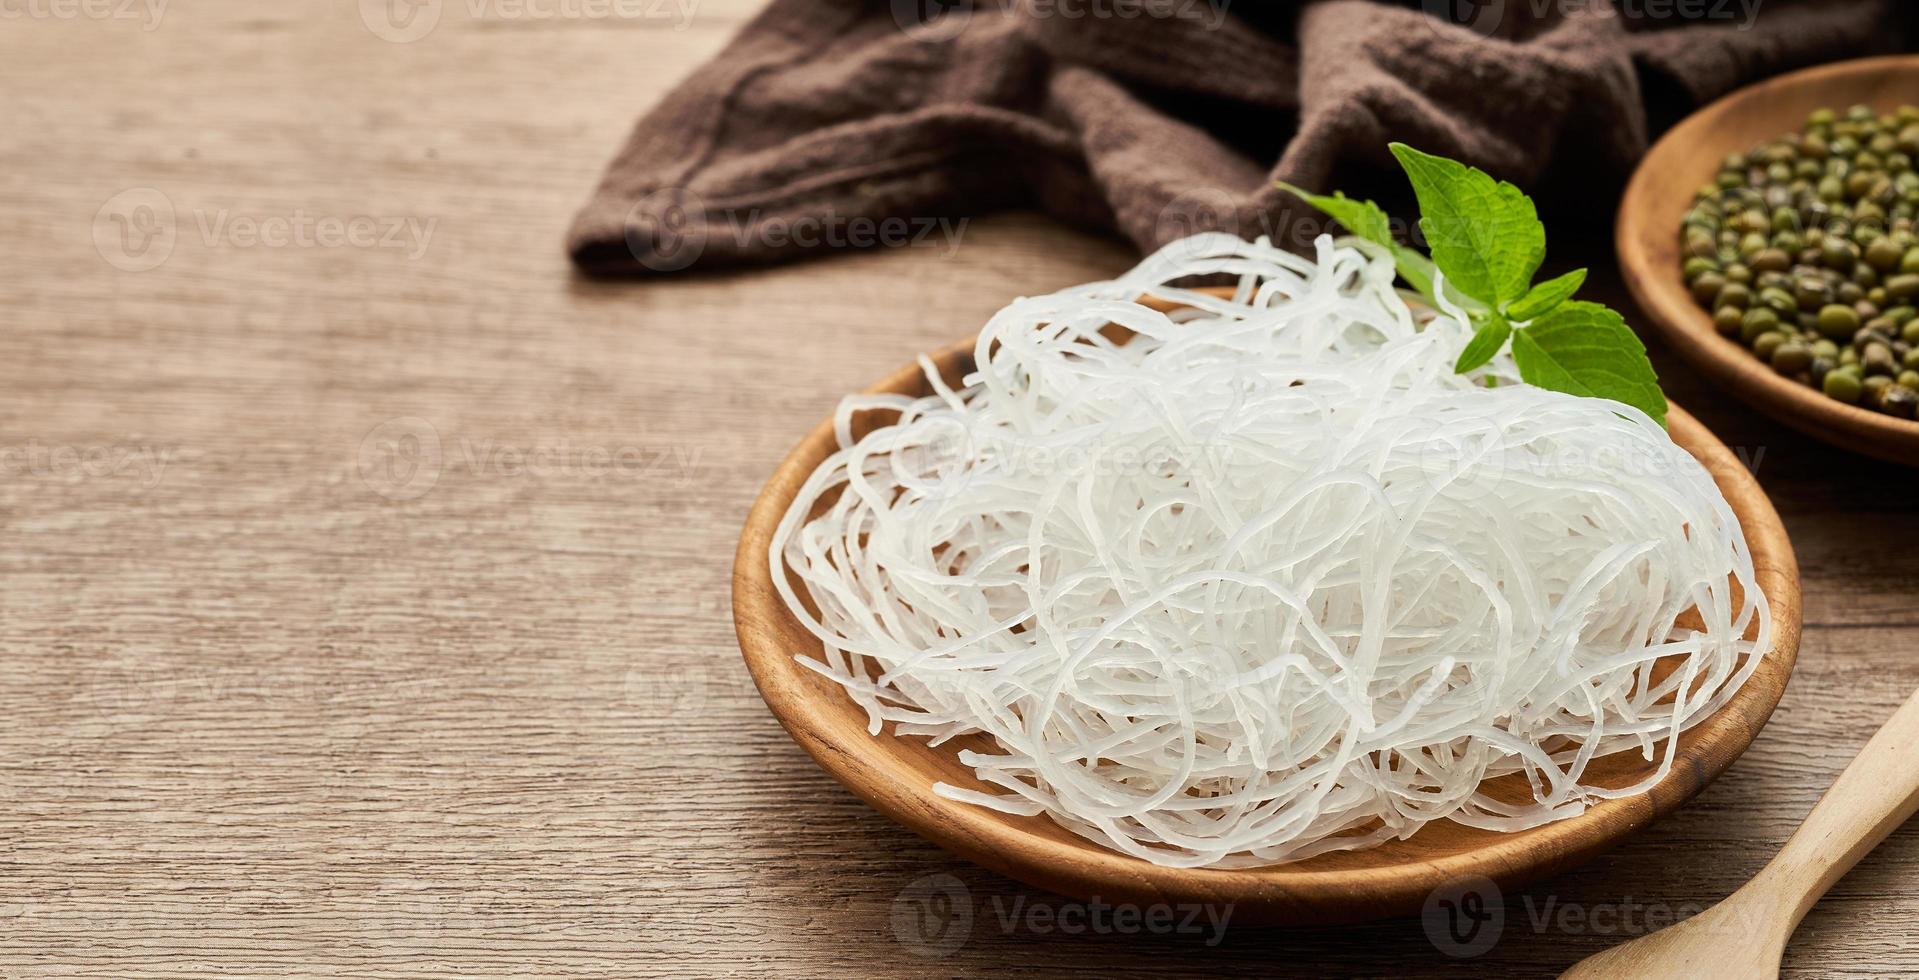 Asian vermicelli or cellophane noodles and mung green bean in wooden plate on wood table background. glass noodle photo